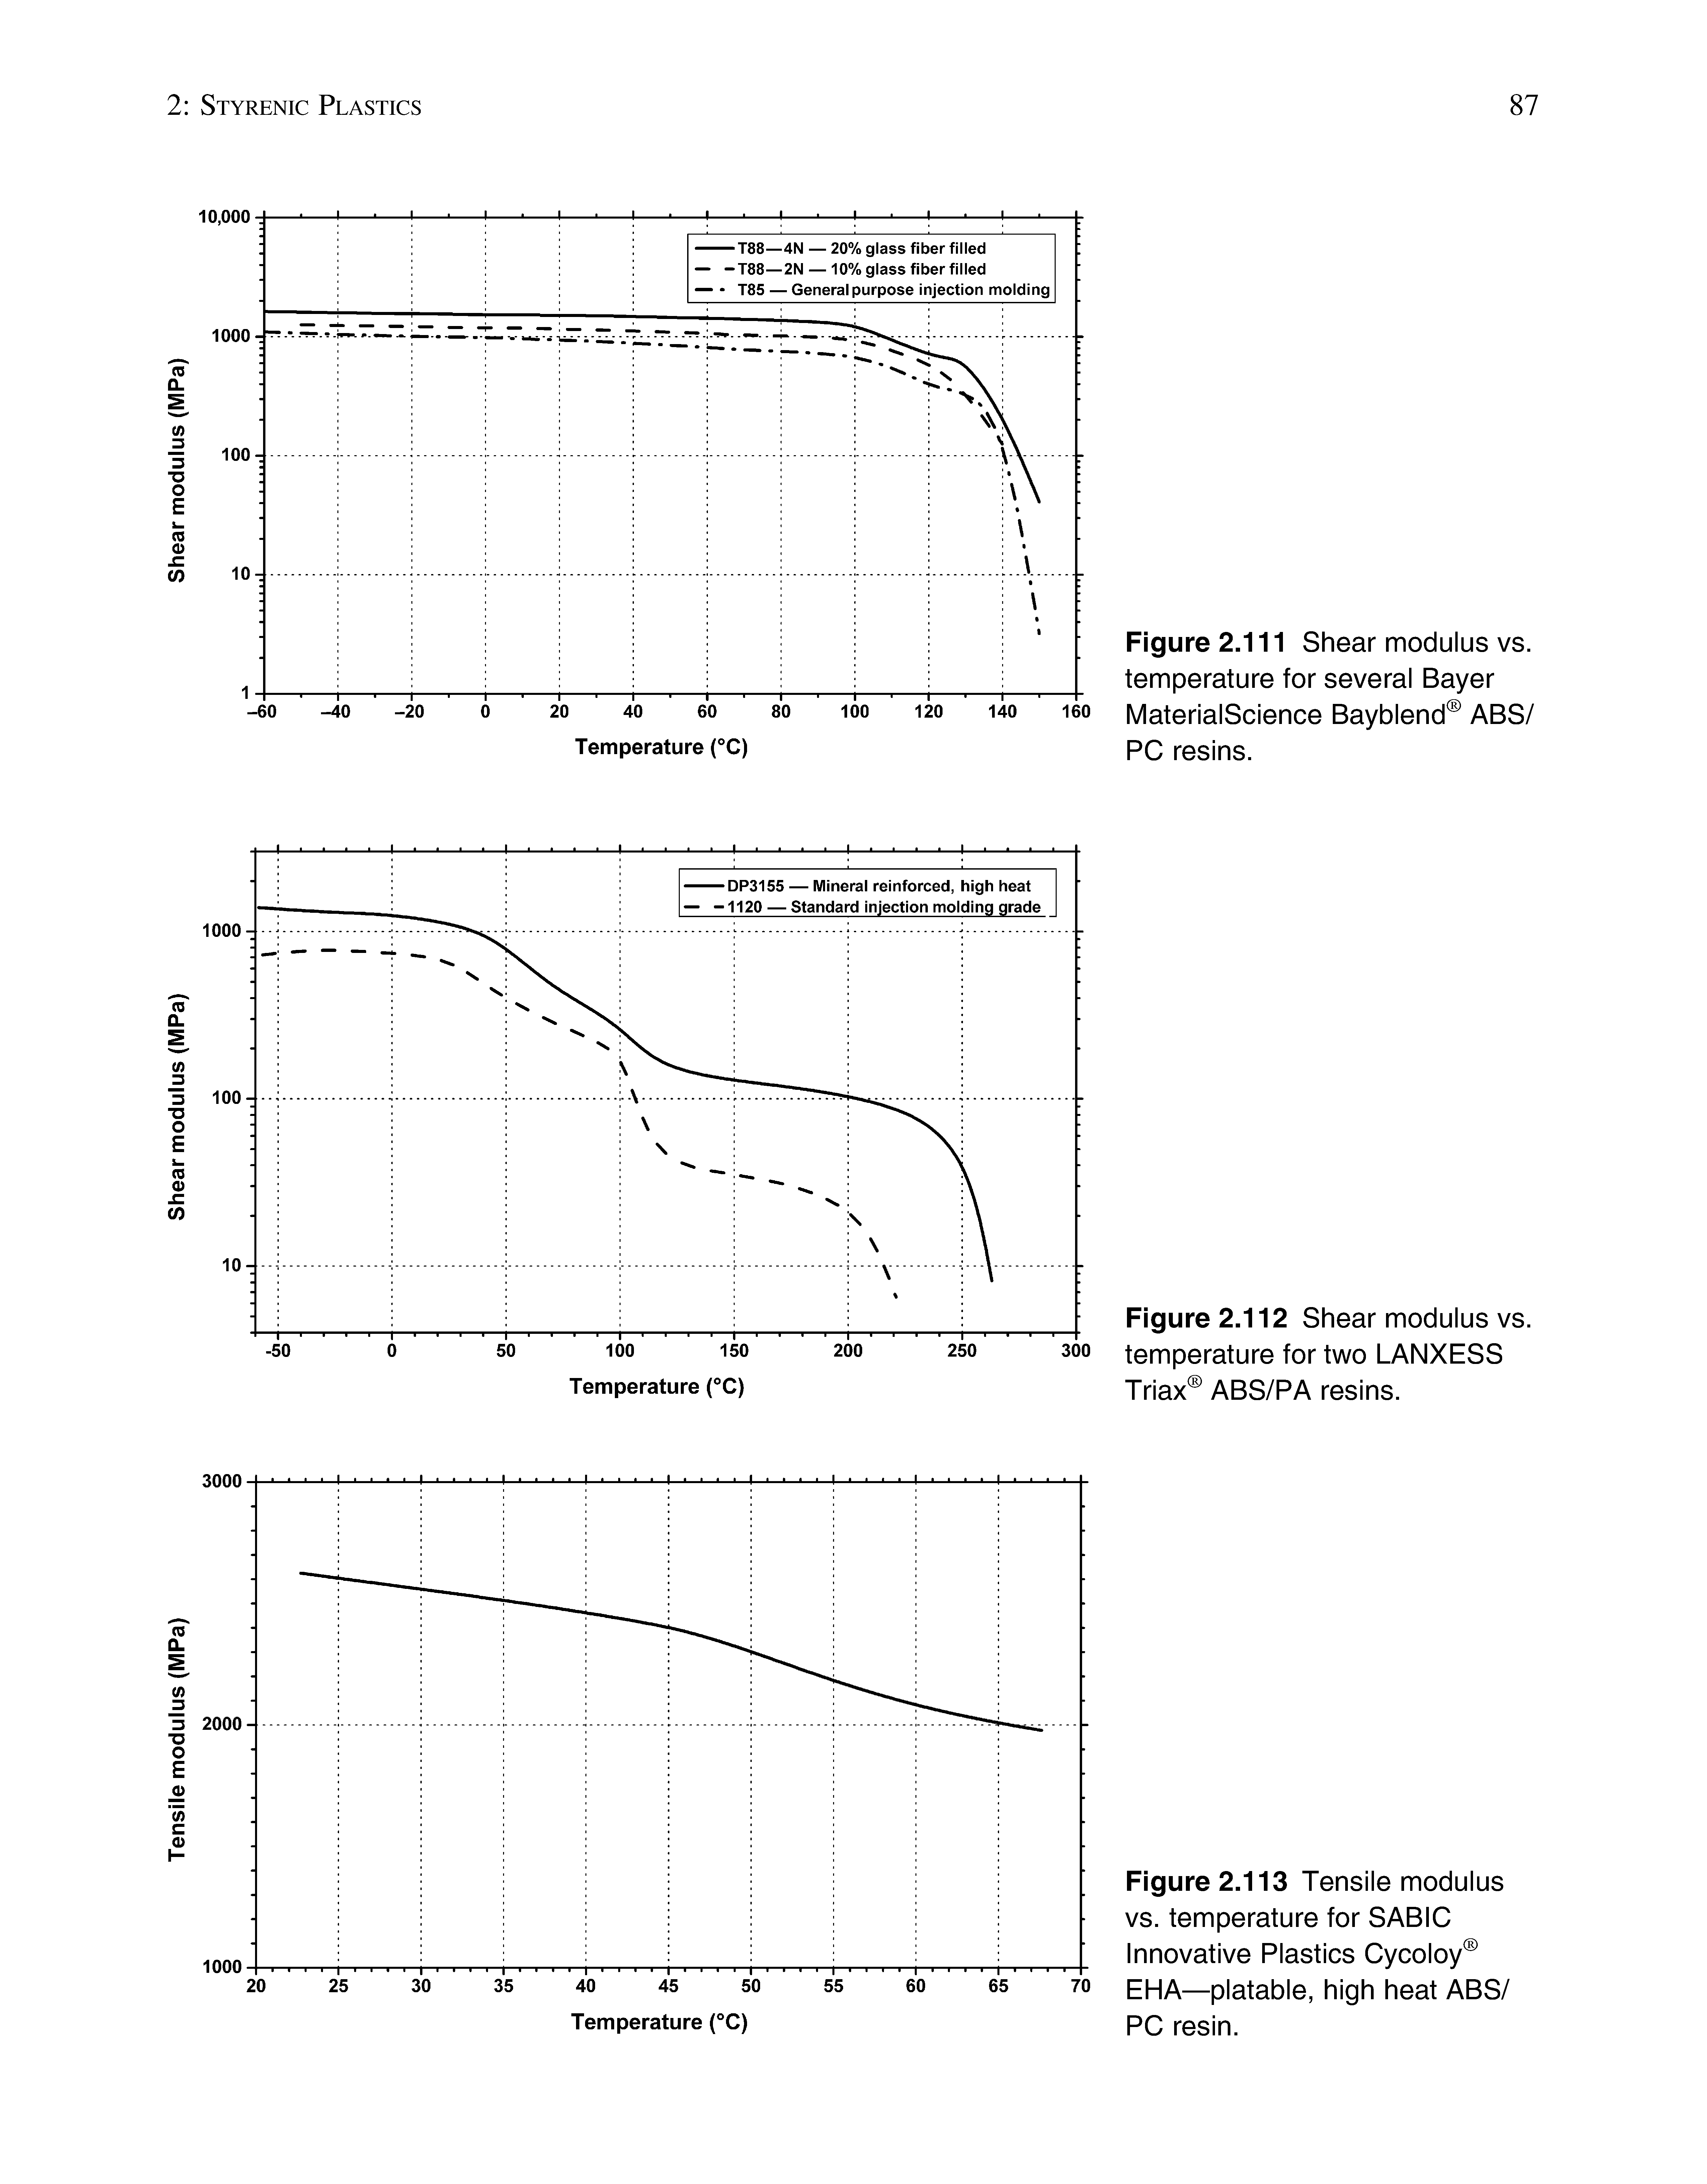 Figure 2.111 Shear modulus vs. temperature for several Bayer MaterialScience Bayblend ABS/ PC resins.